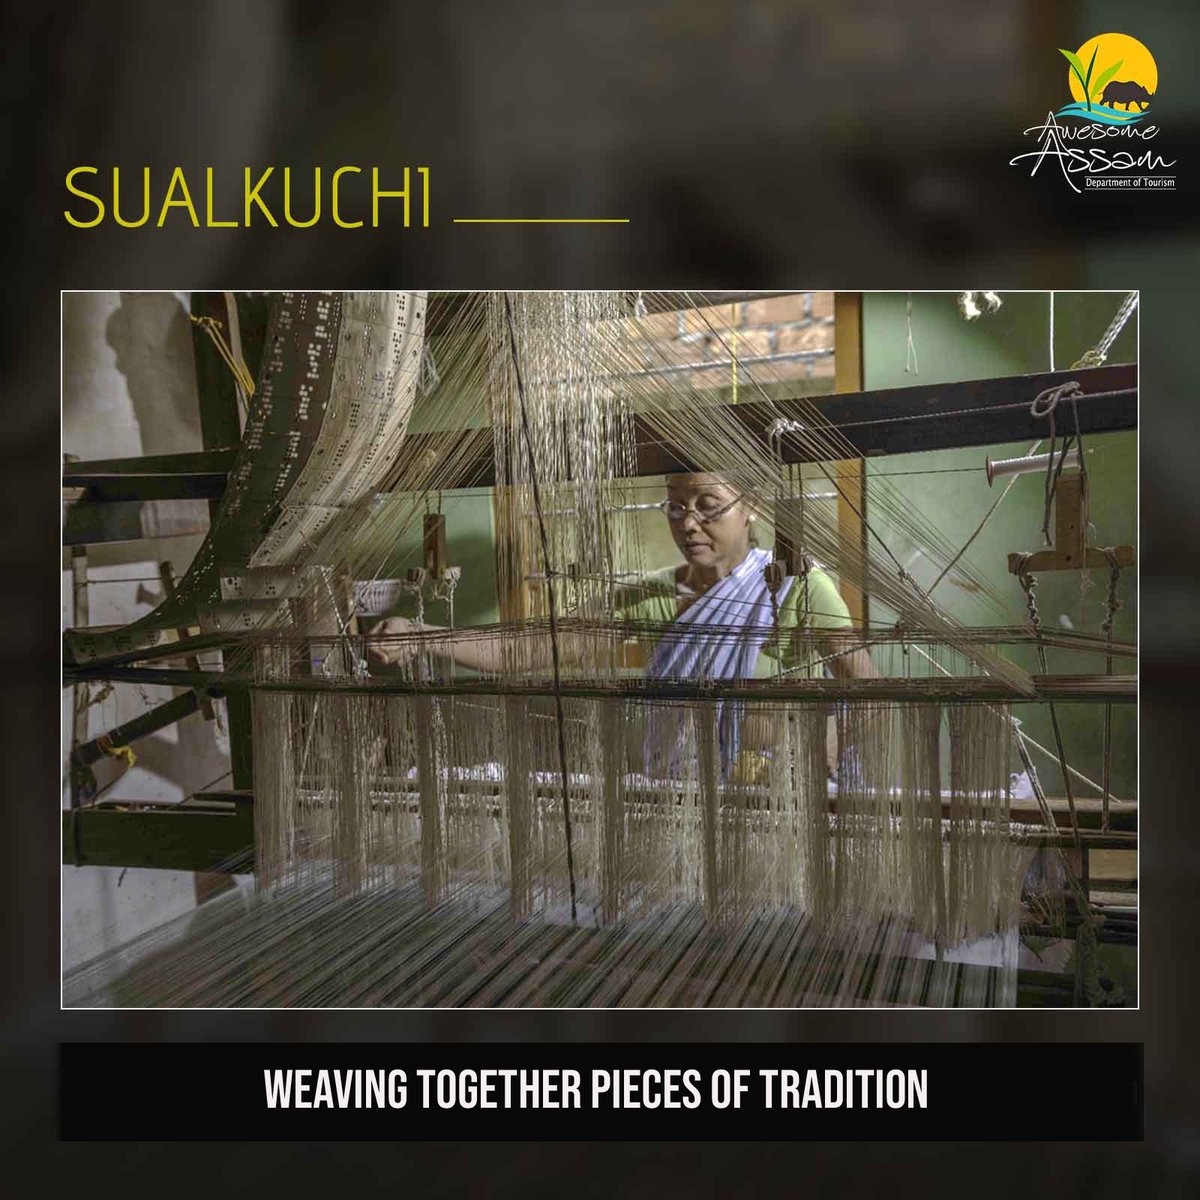 Discover the Weaver’s Village in Sualkuchi, where weaving dates back to 11th century. If you visit this quaint town, you could only hear the sound of the traditional loom, coordinating feet and hands of weavers weaving exceptionally beautiful sador. 

 #AwesomeAssam #Assam